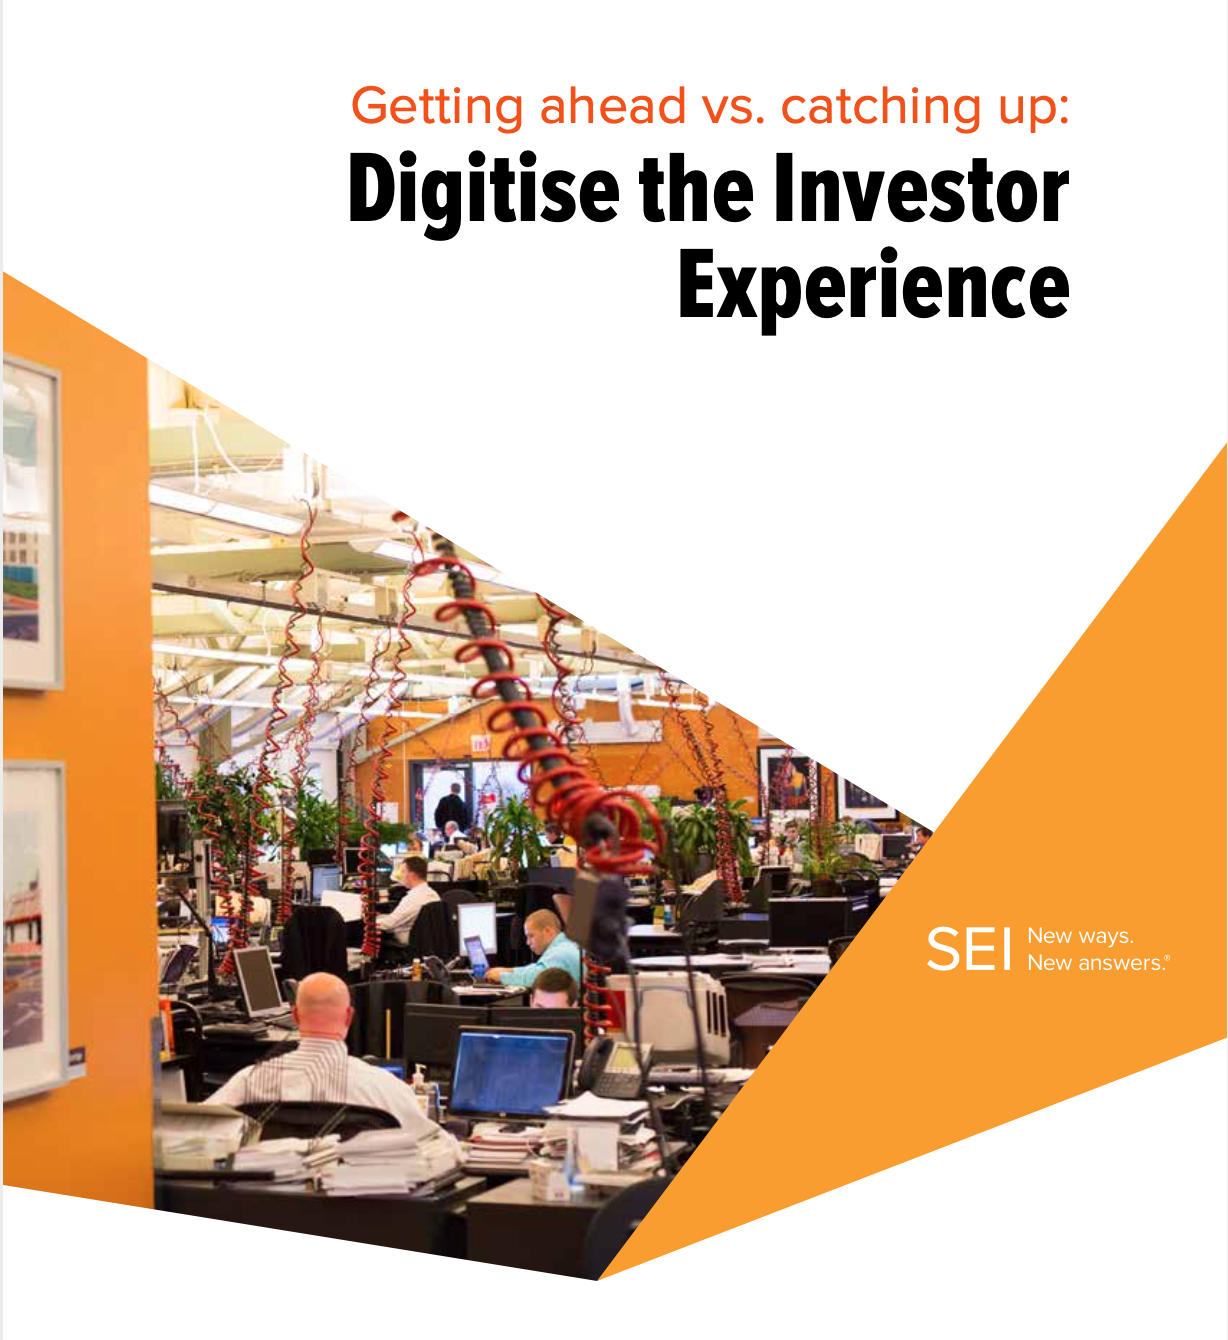 Getting ahead vs catching up: Digitalise the investor experience